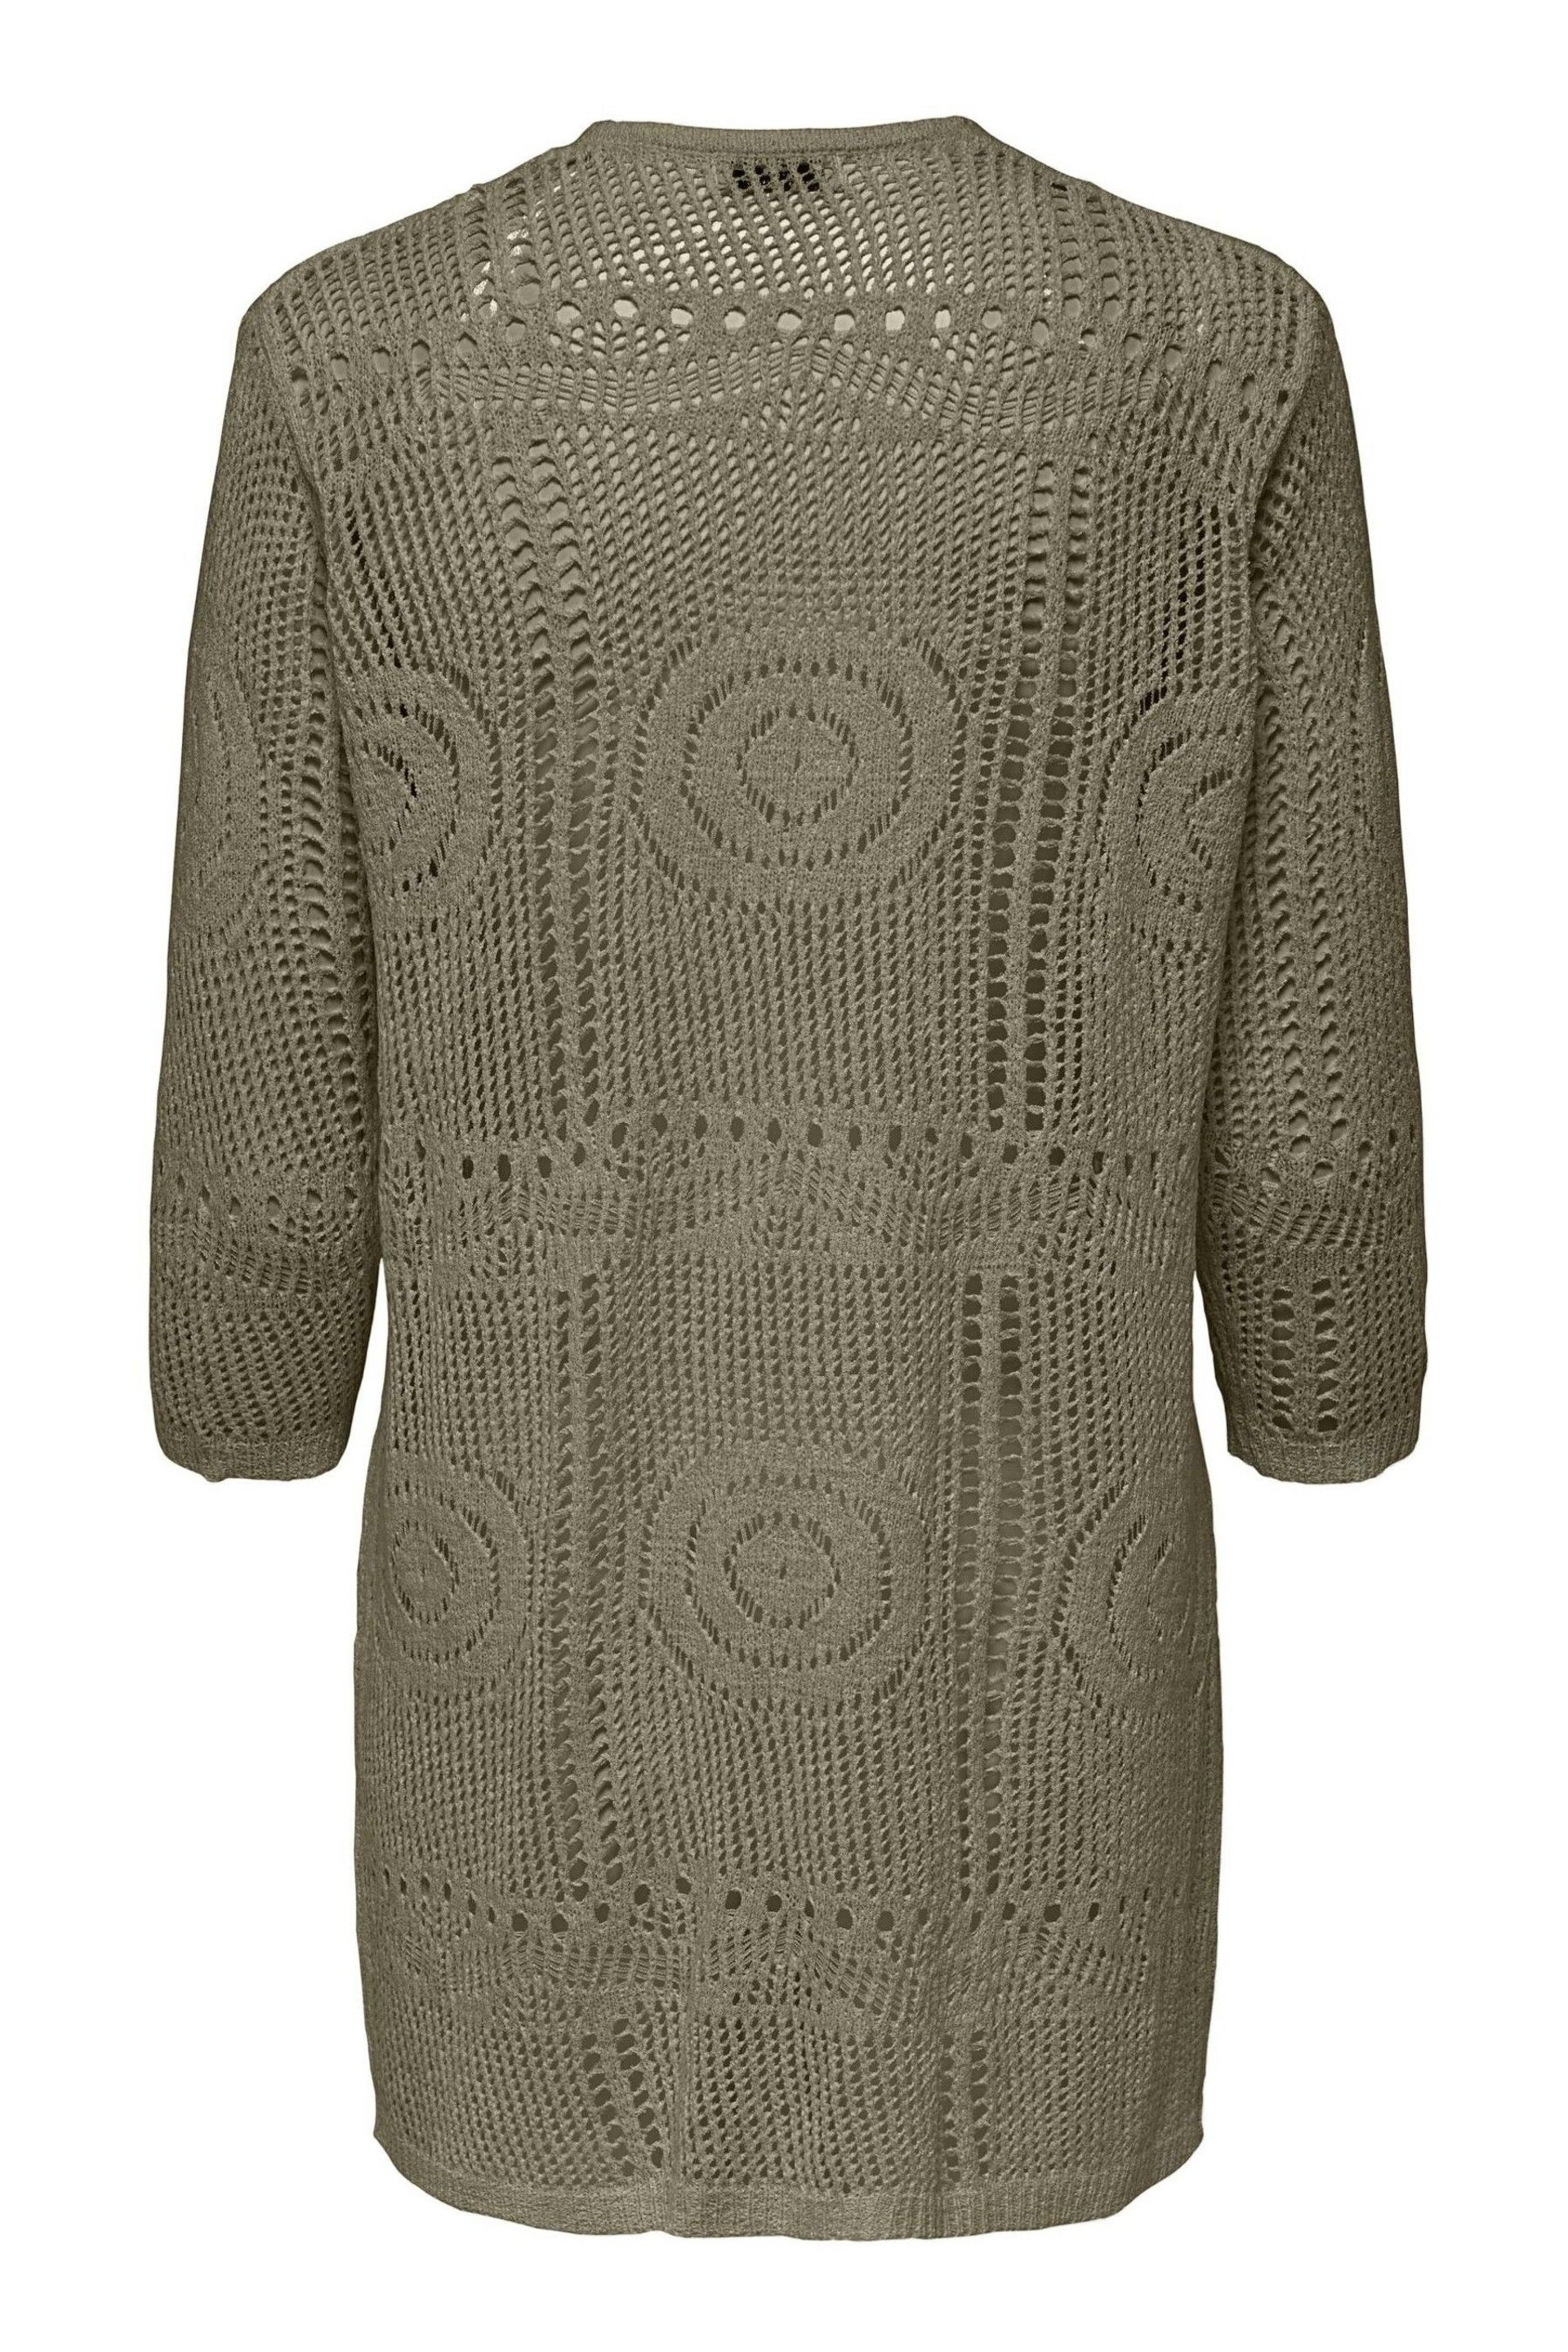 JDY Green Crochet Relaxed Summer Cardigan - Image 3 of 4